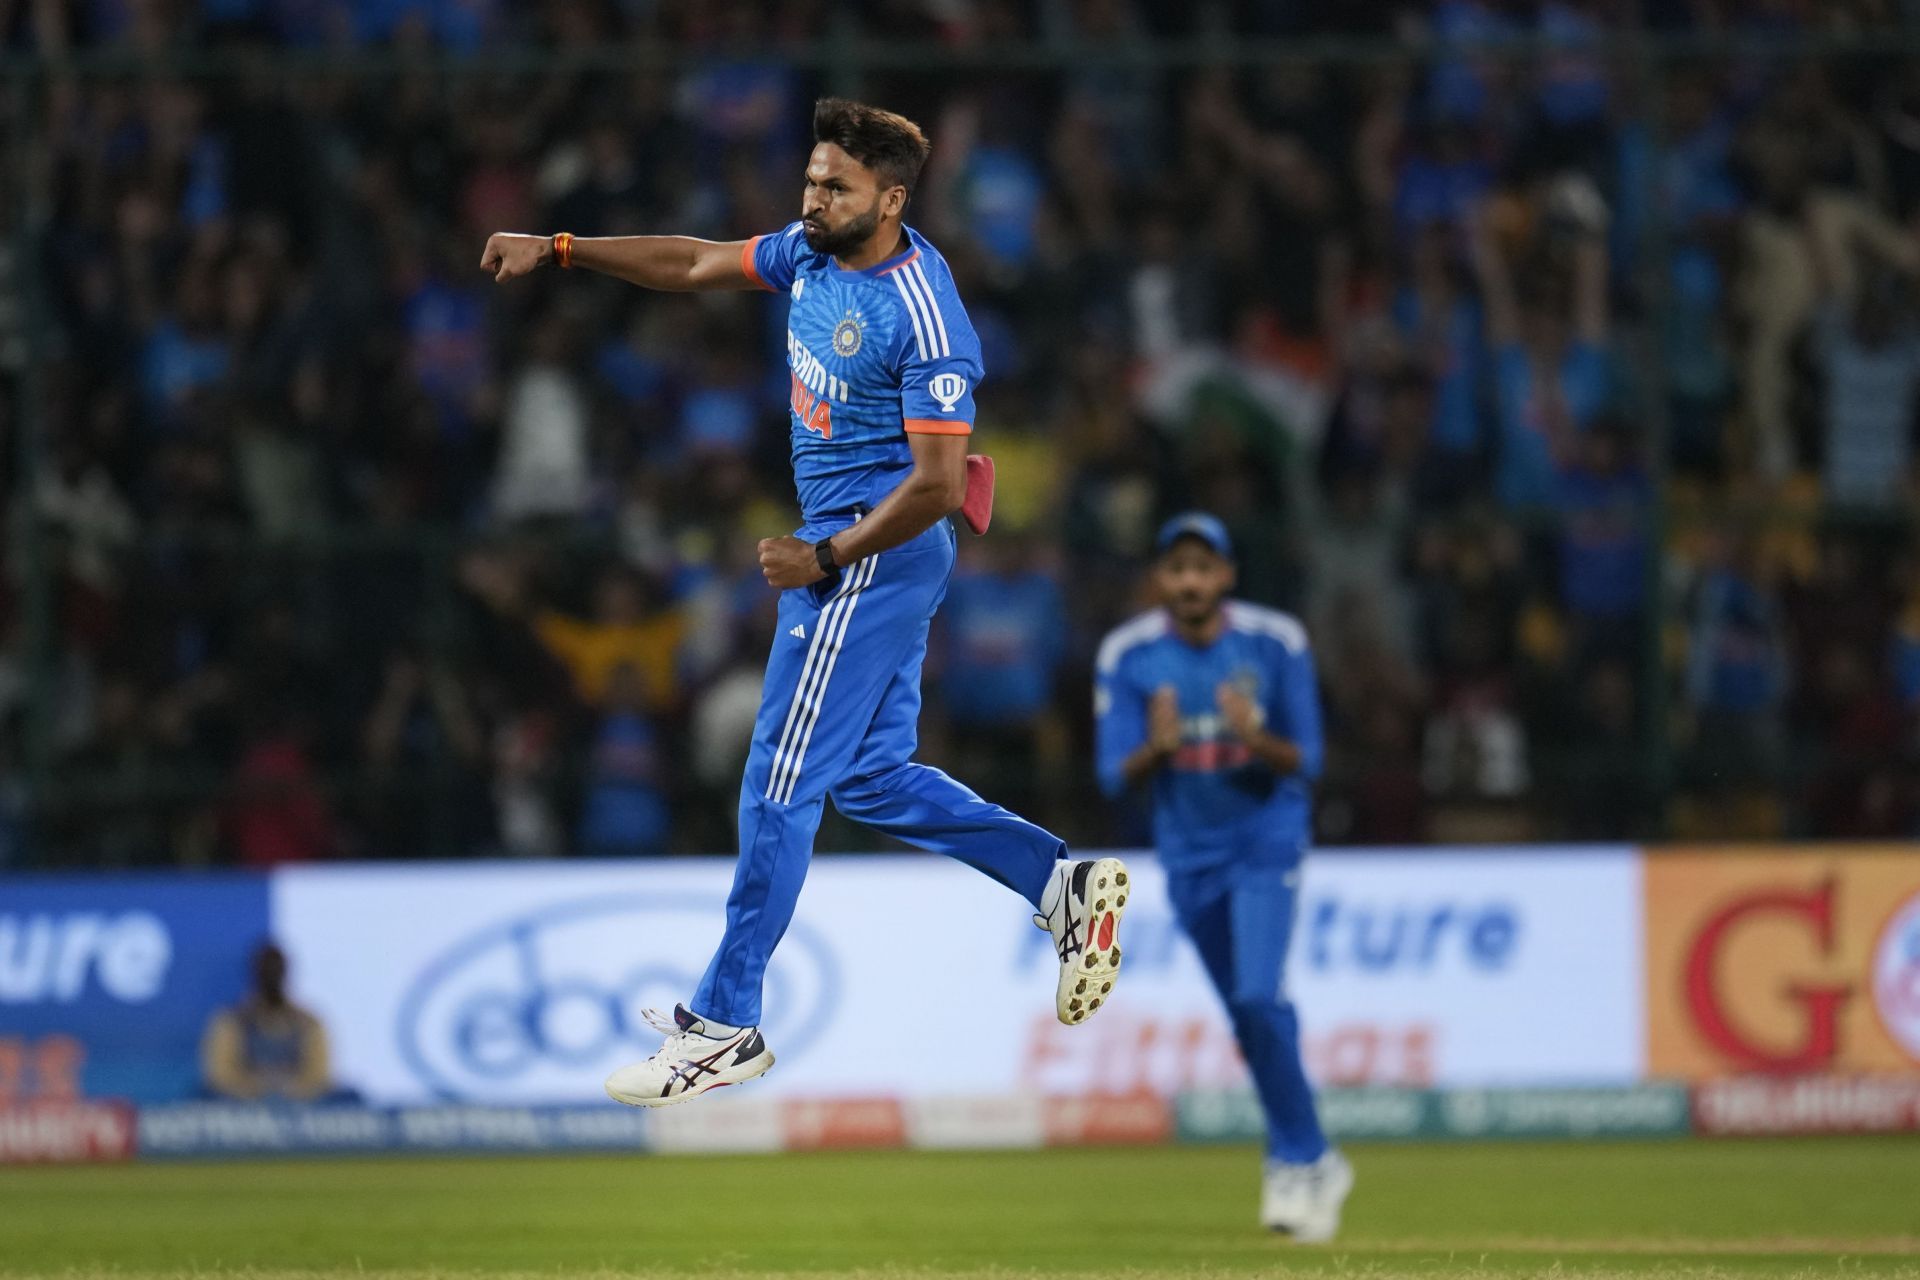 Mukesh Kumar picked up three wickets in the final T20I against Australia. [P/C: AP]